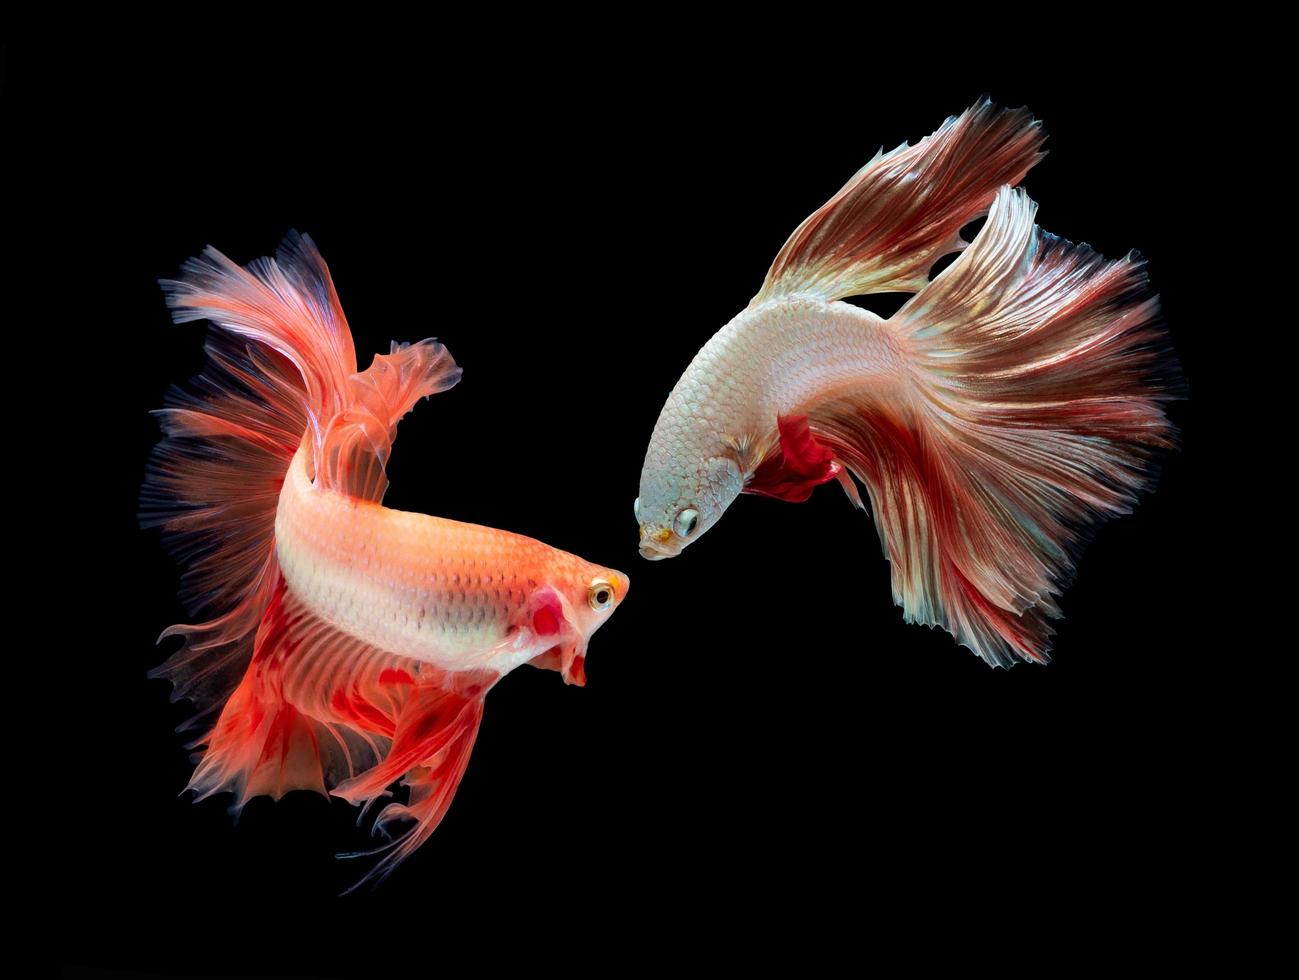 Action and movement of SiameseThai fighting fish on a black background photo